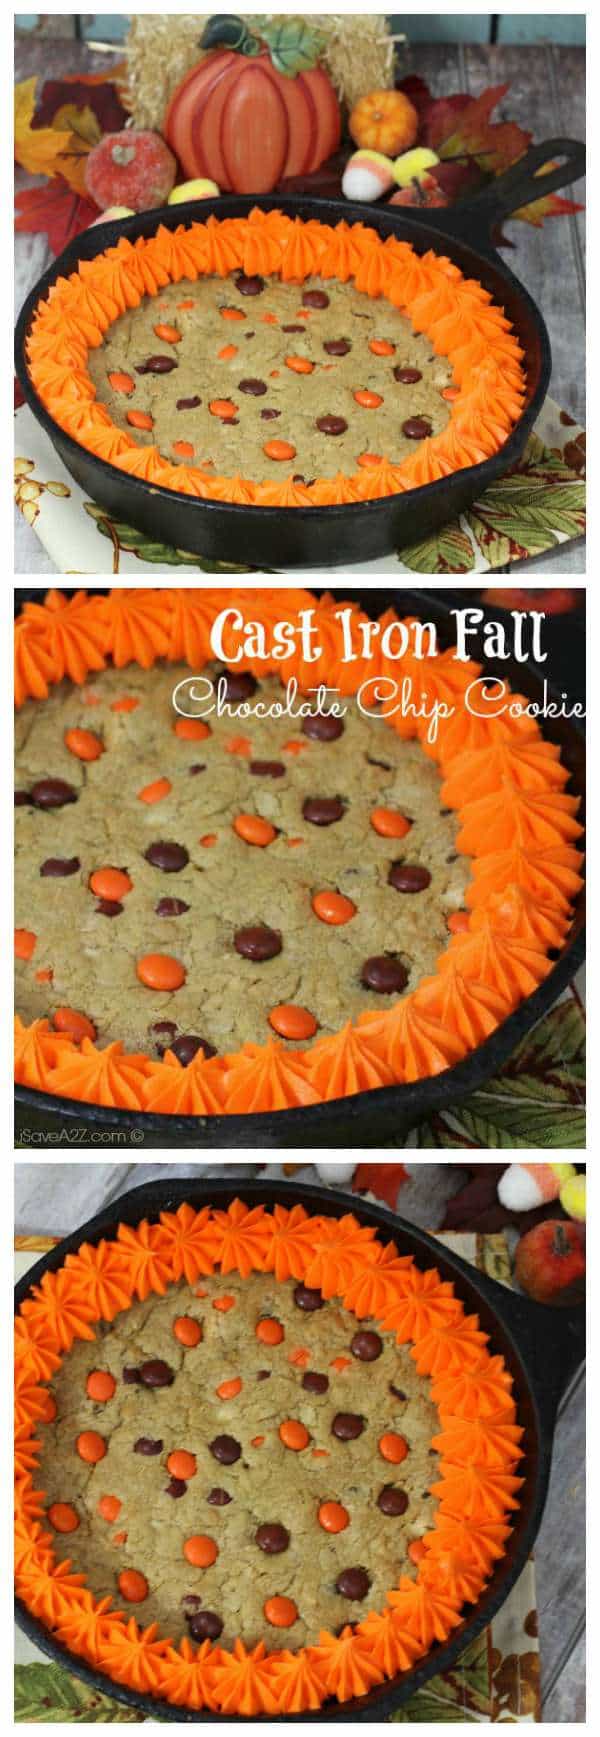 Cast Iron Fall Chocolate Chip Cookie